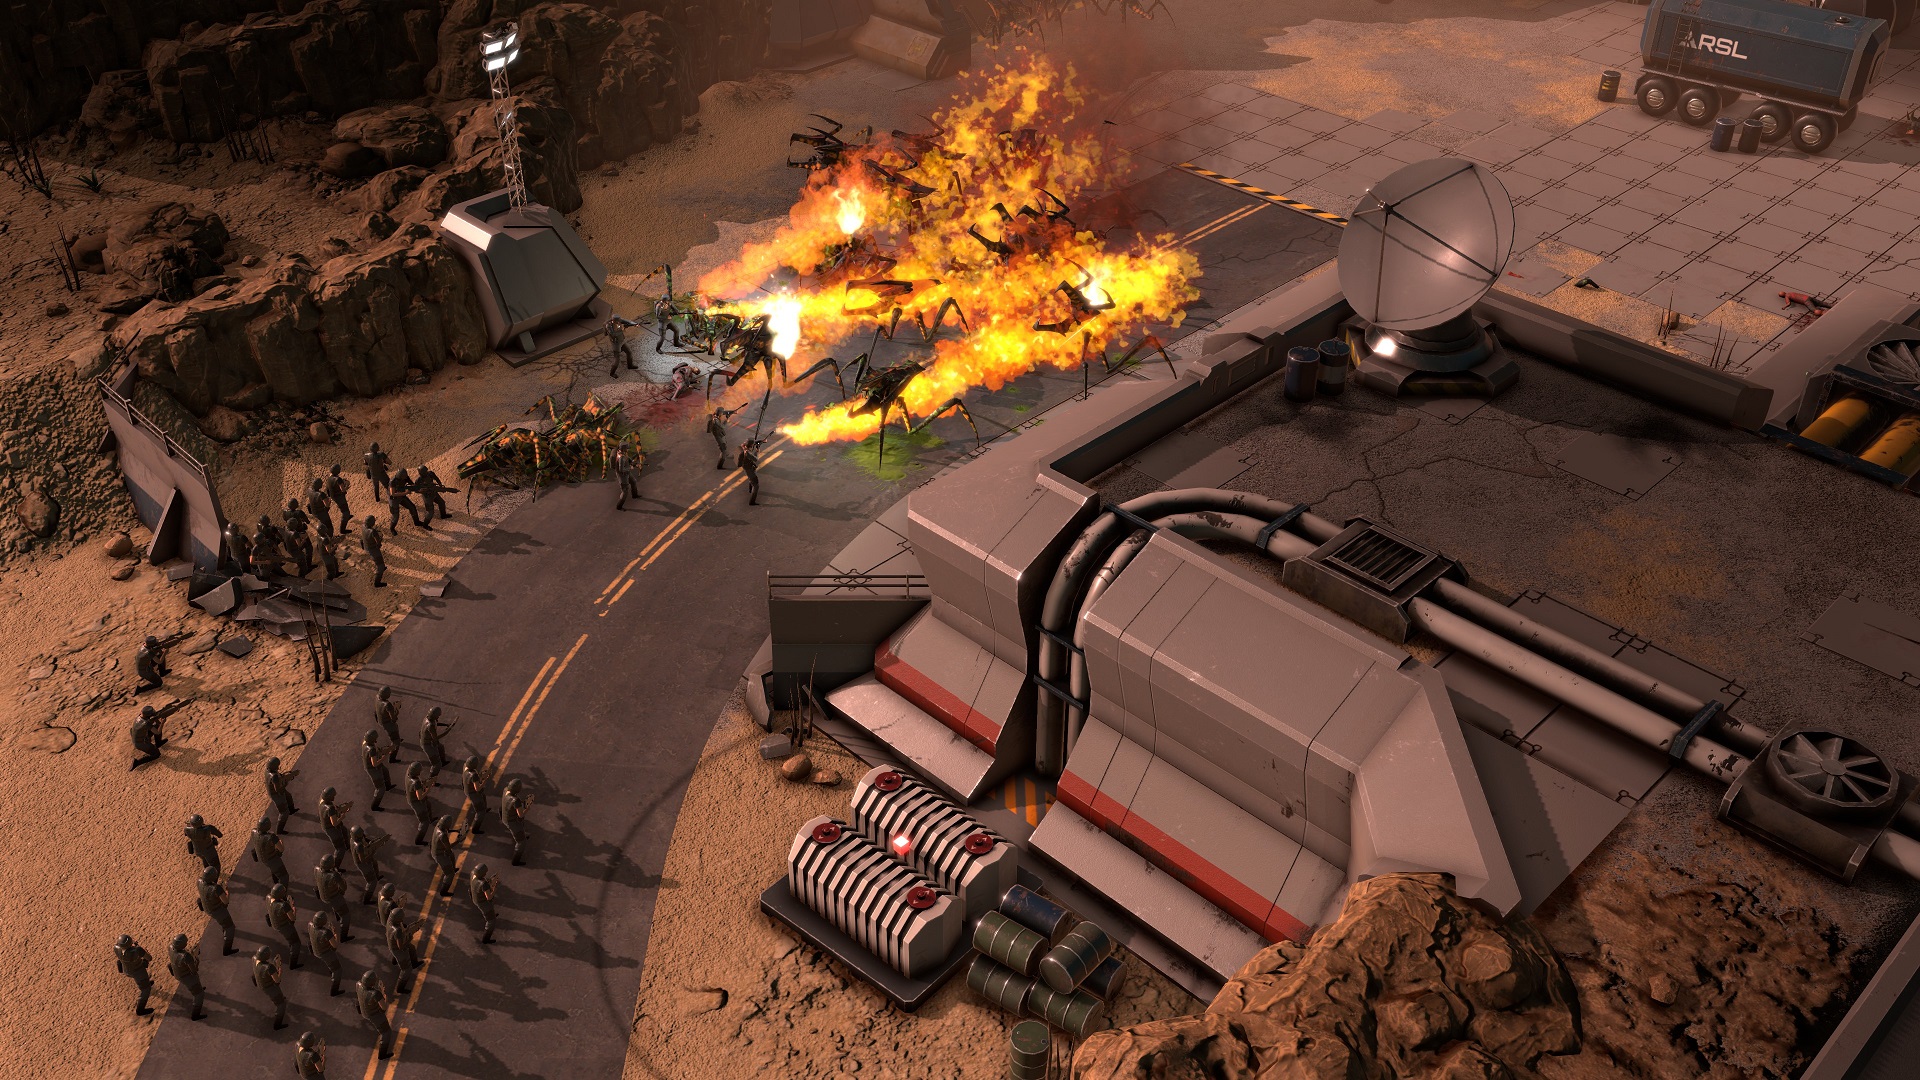 The Mobile Infantry facing off against a hoard of bugs in Starship Troopers: Terran Command.